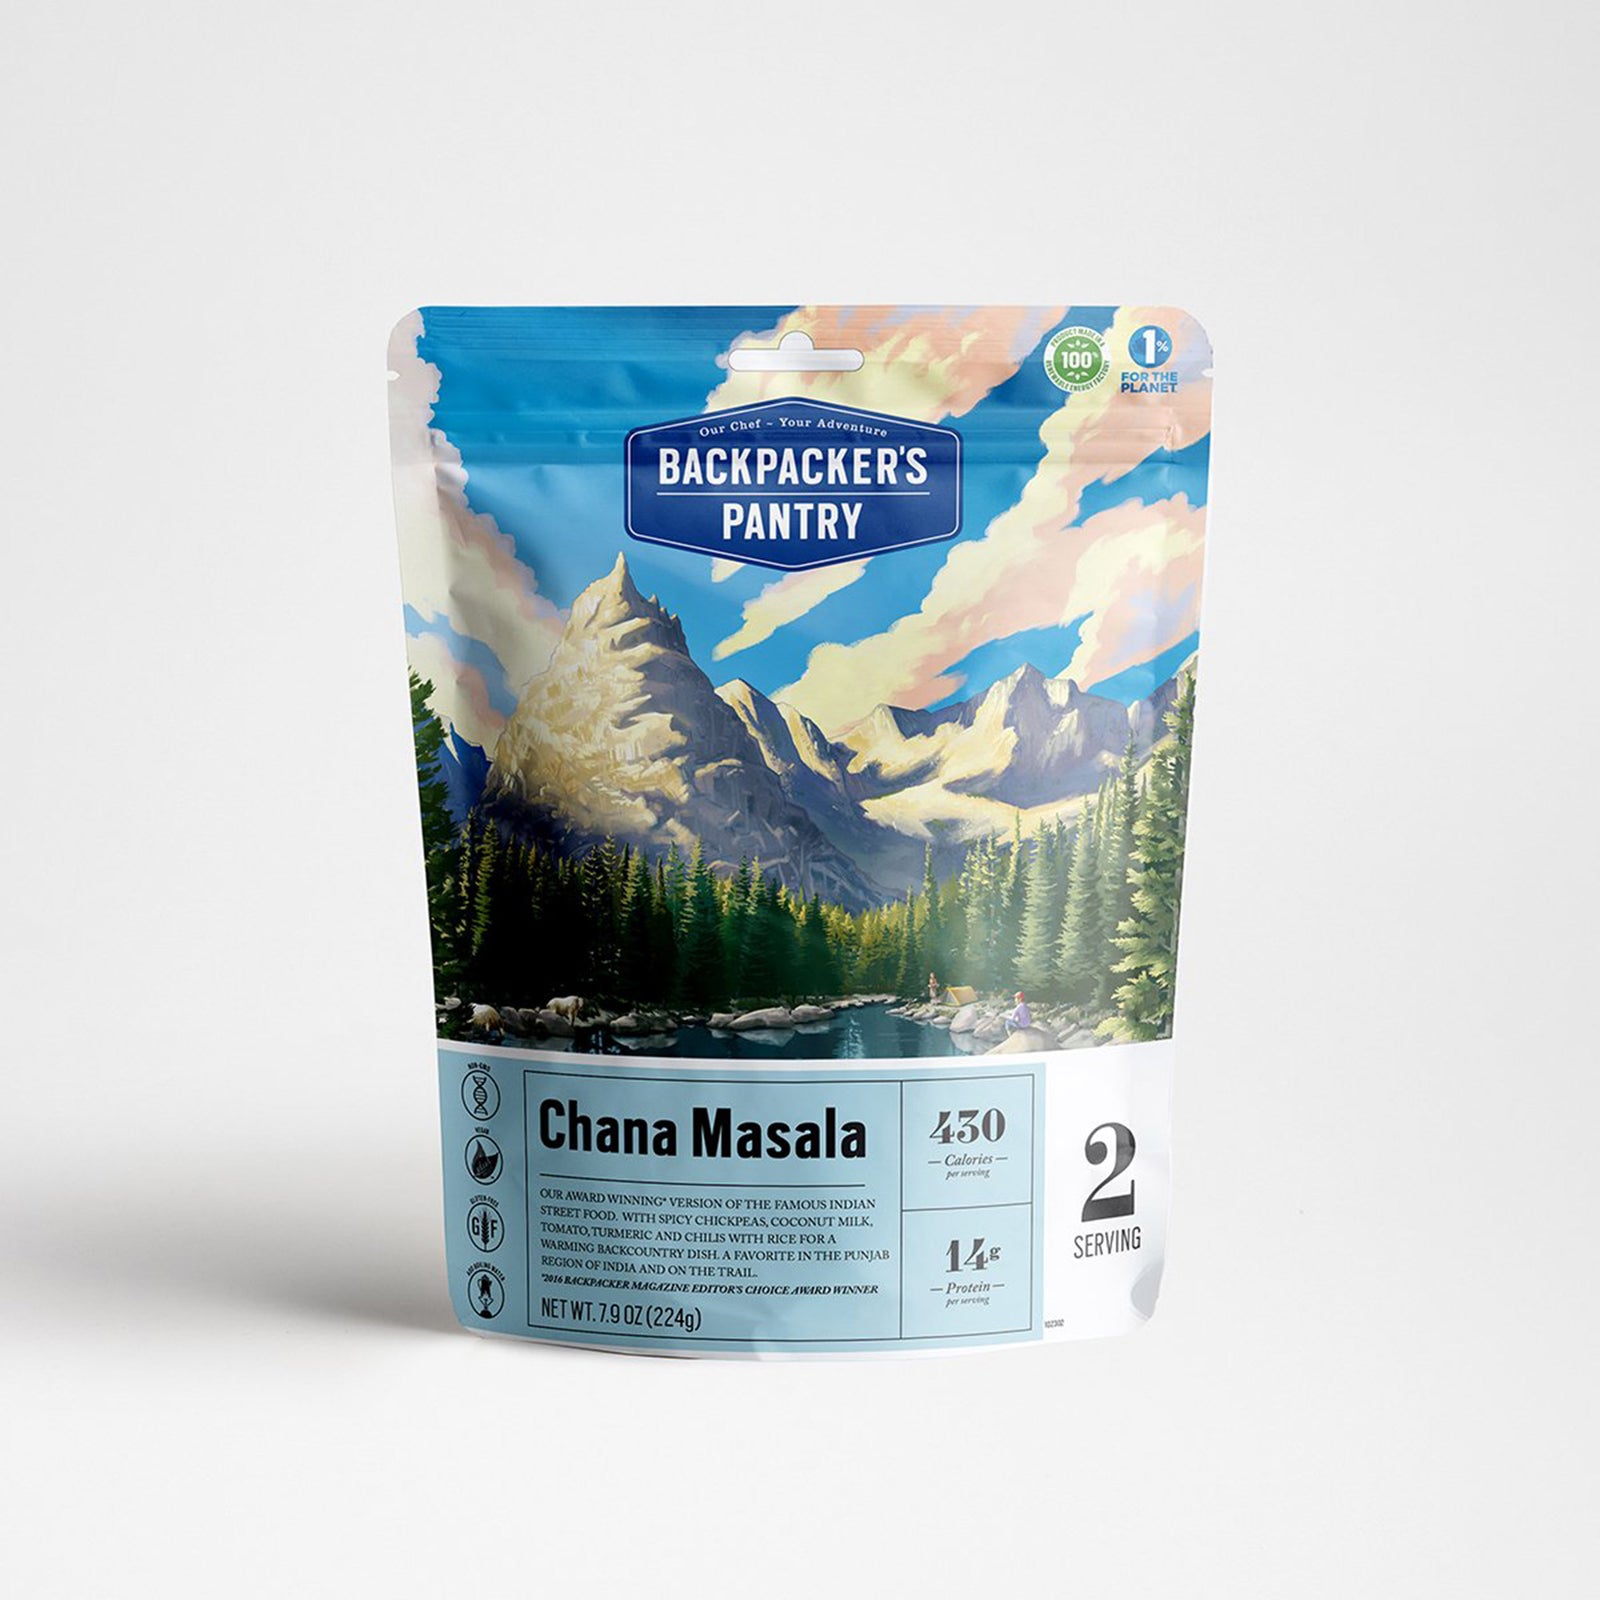 A photo of Backpackers Pantry Chana Masala packaging, the front of the package